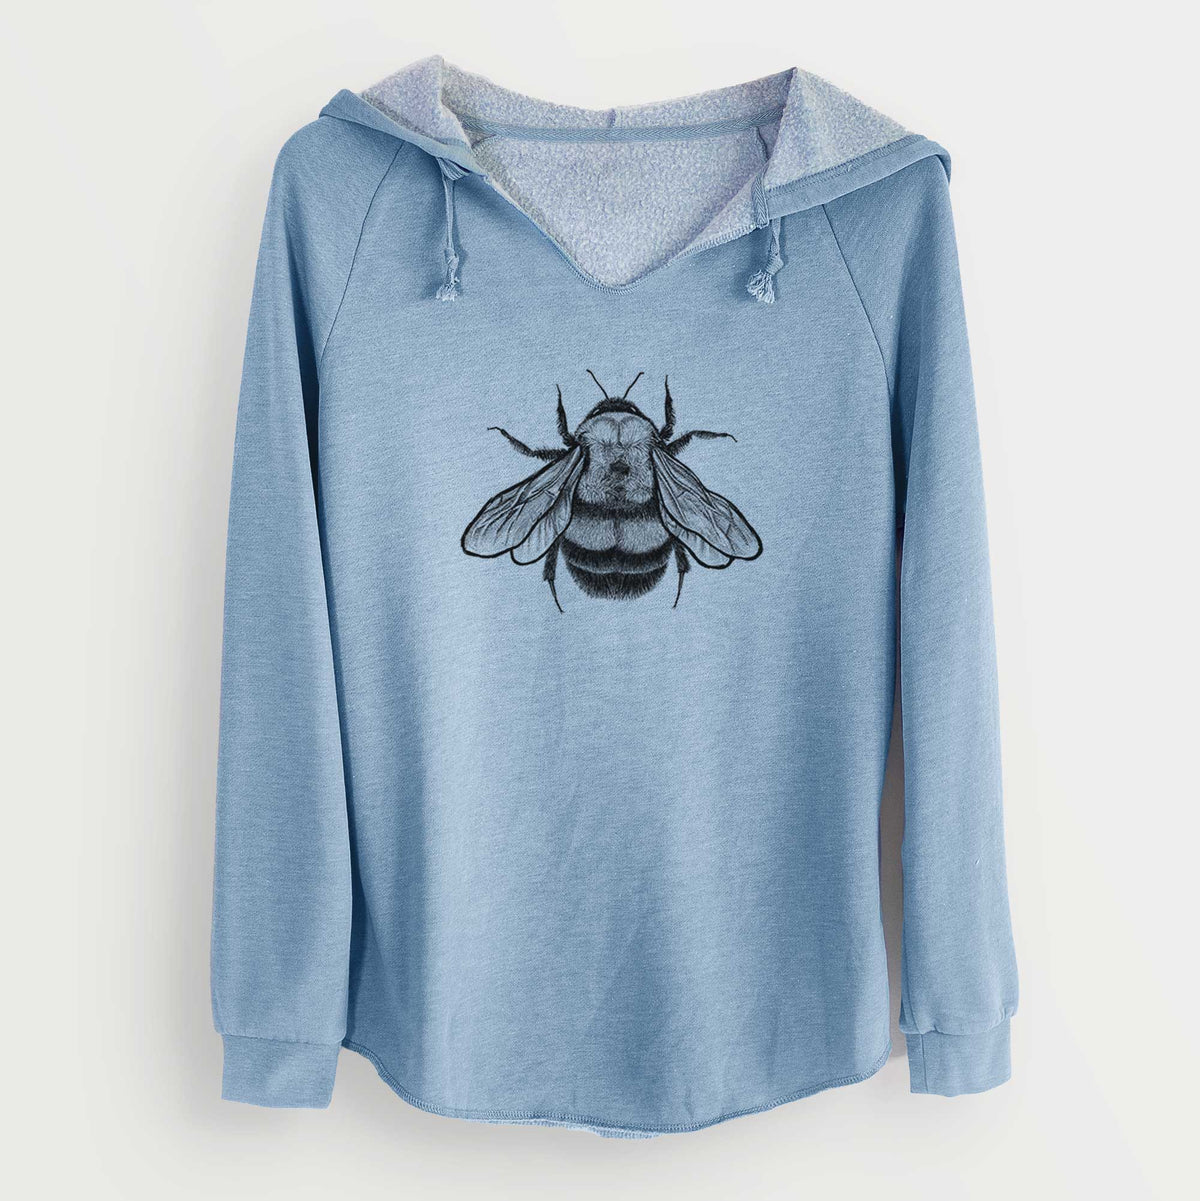 Bombus Affinis - Rusty-Patched Bumble Bee - Cali Wave Hooded Sweatshirt